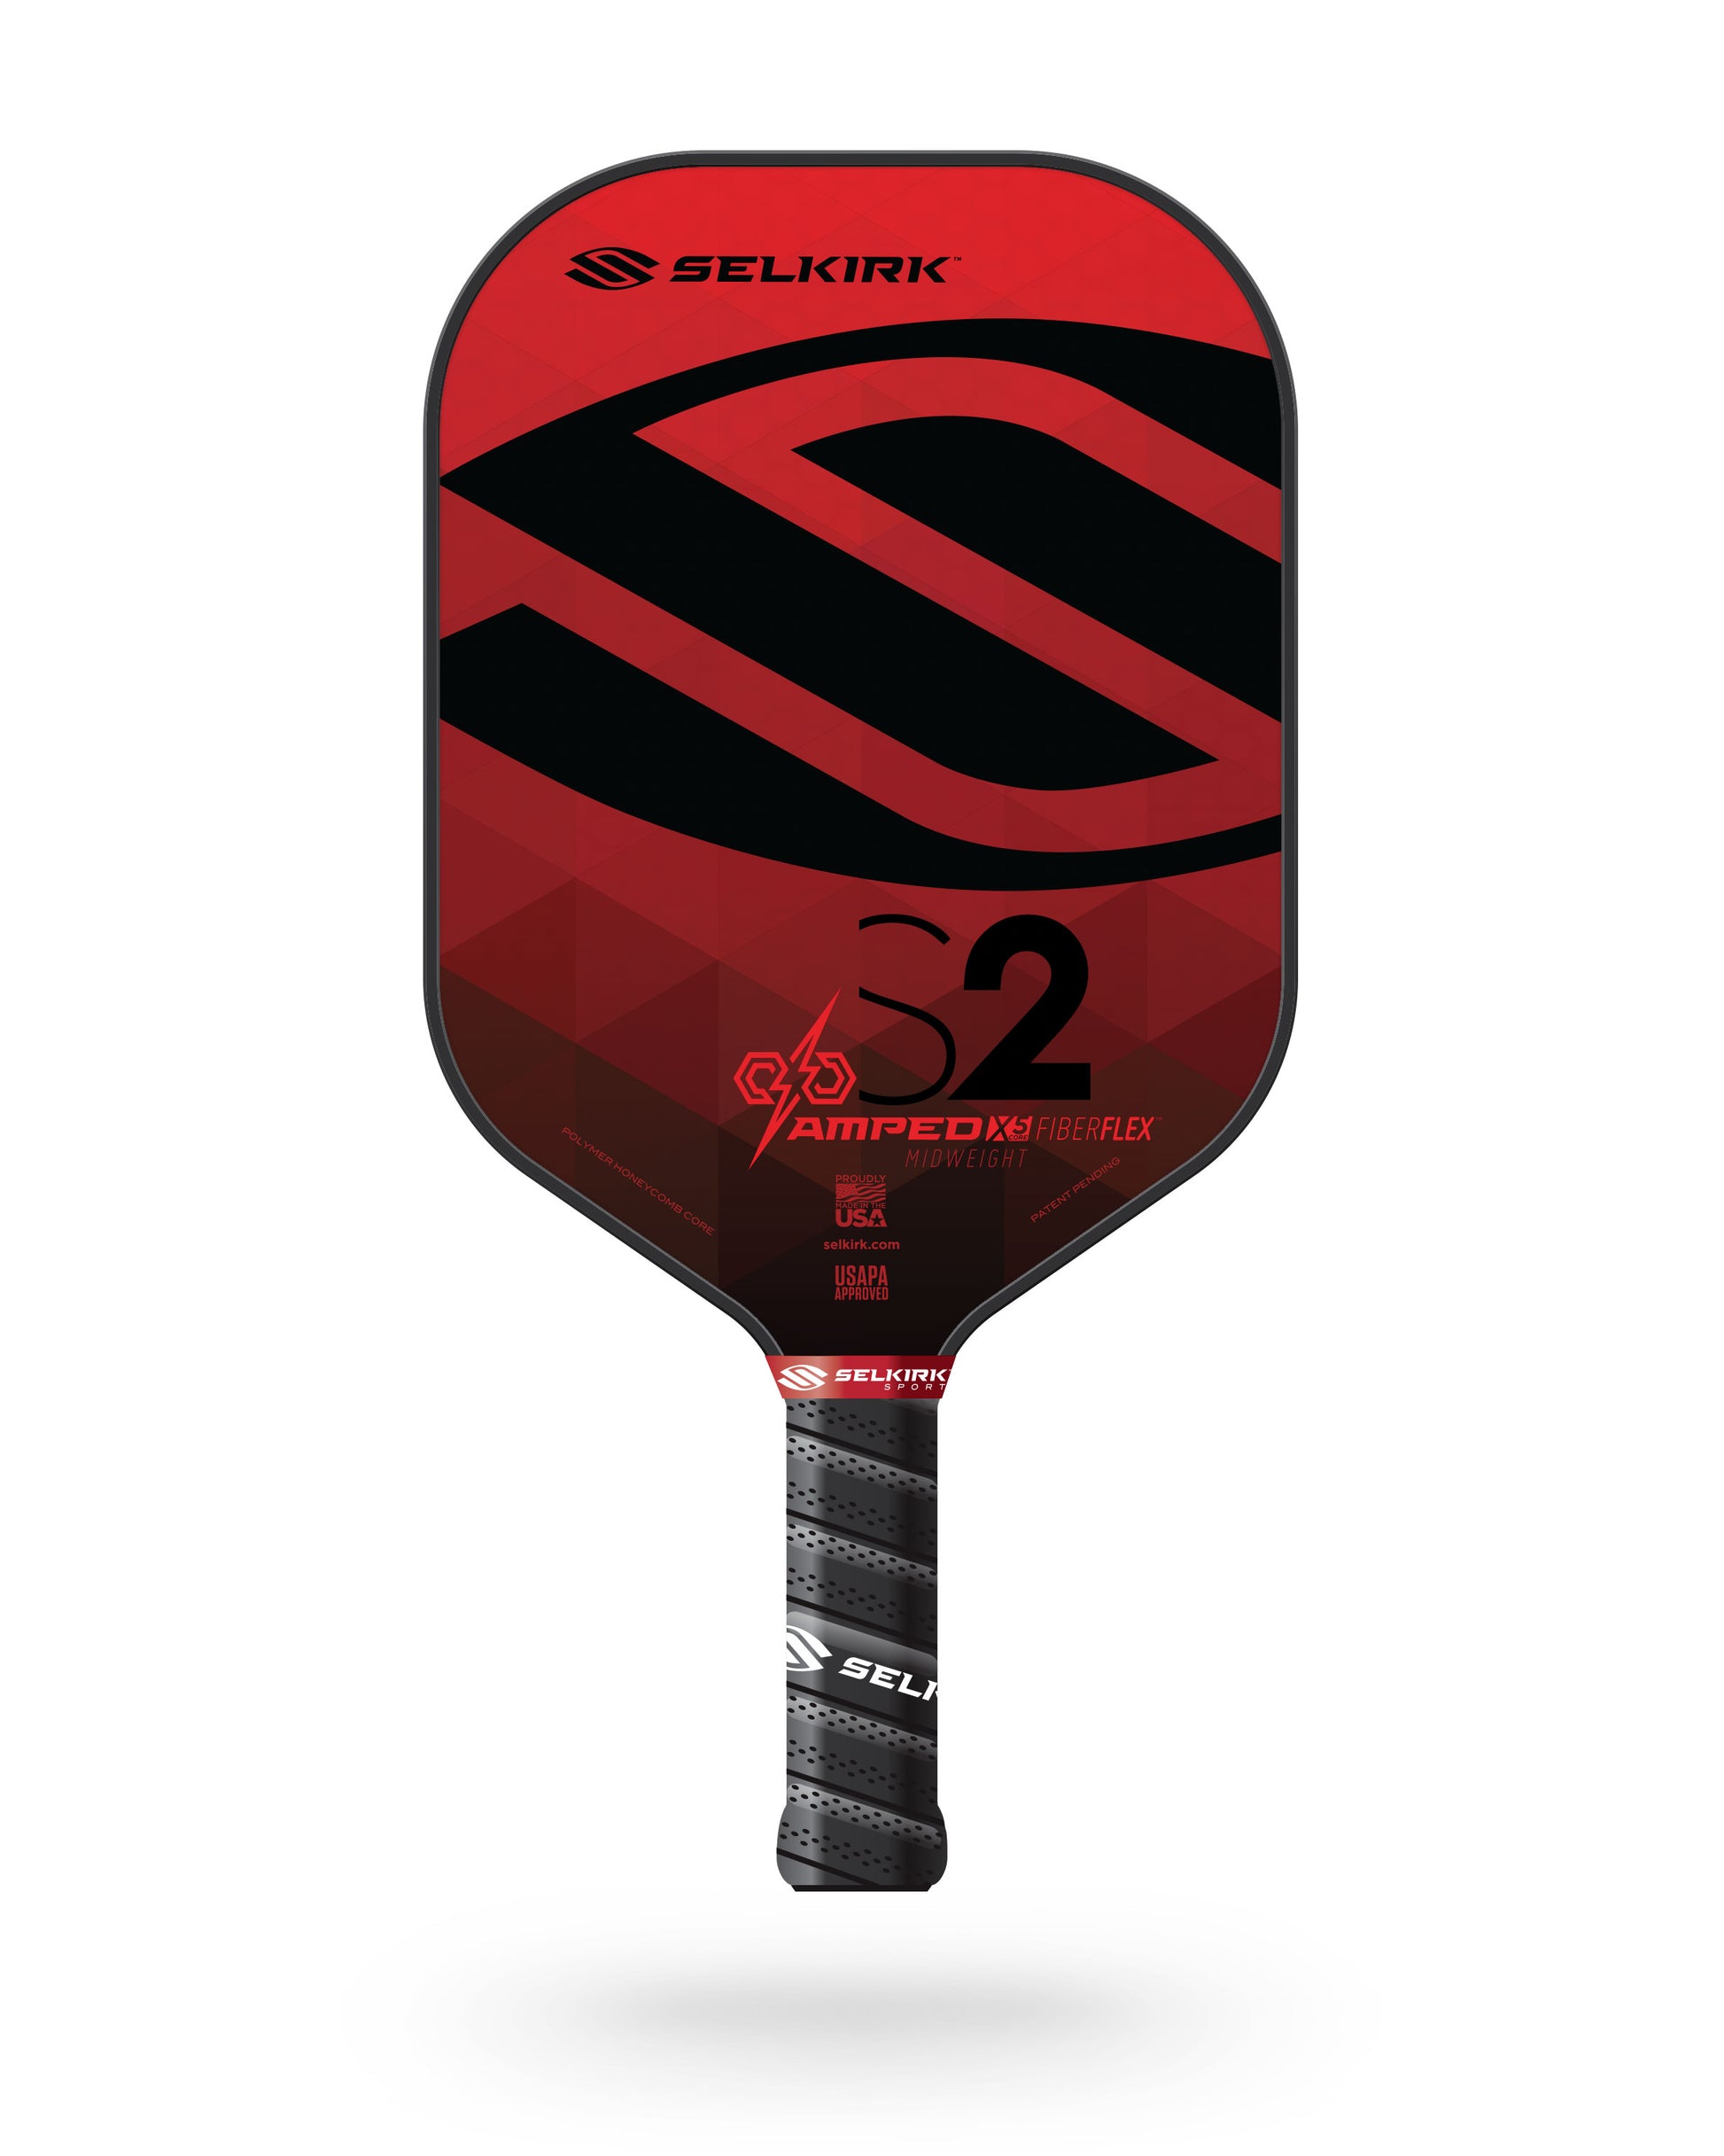 Selkirk AMPED S2 Pickleball Paddle in red and black